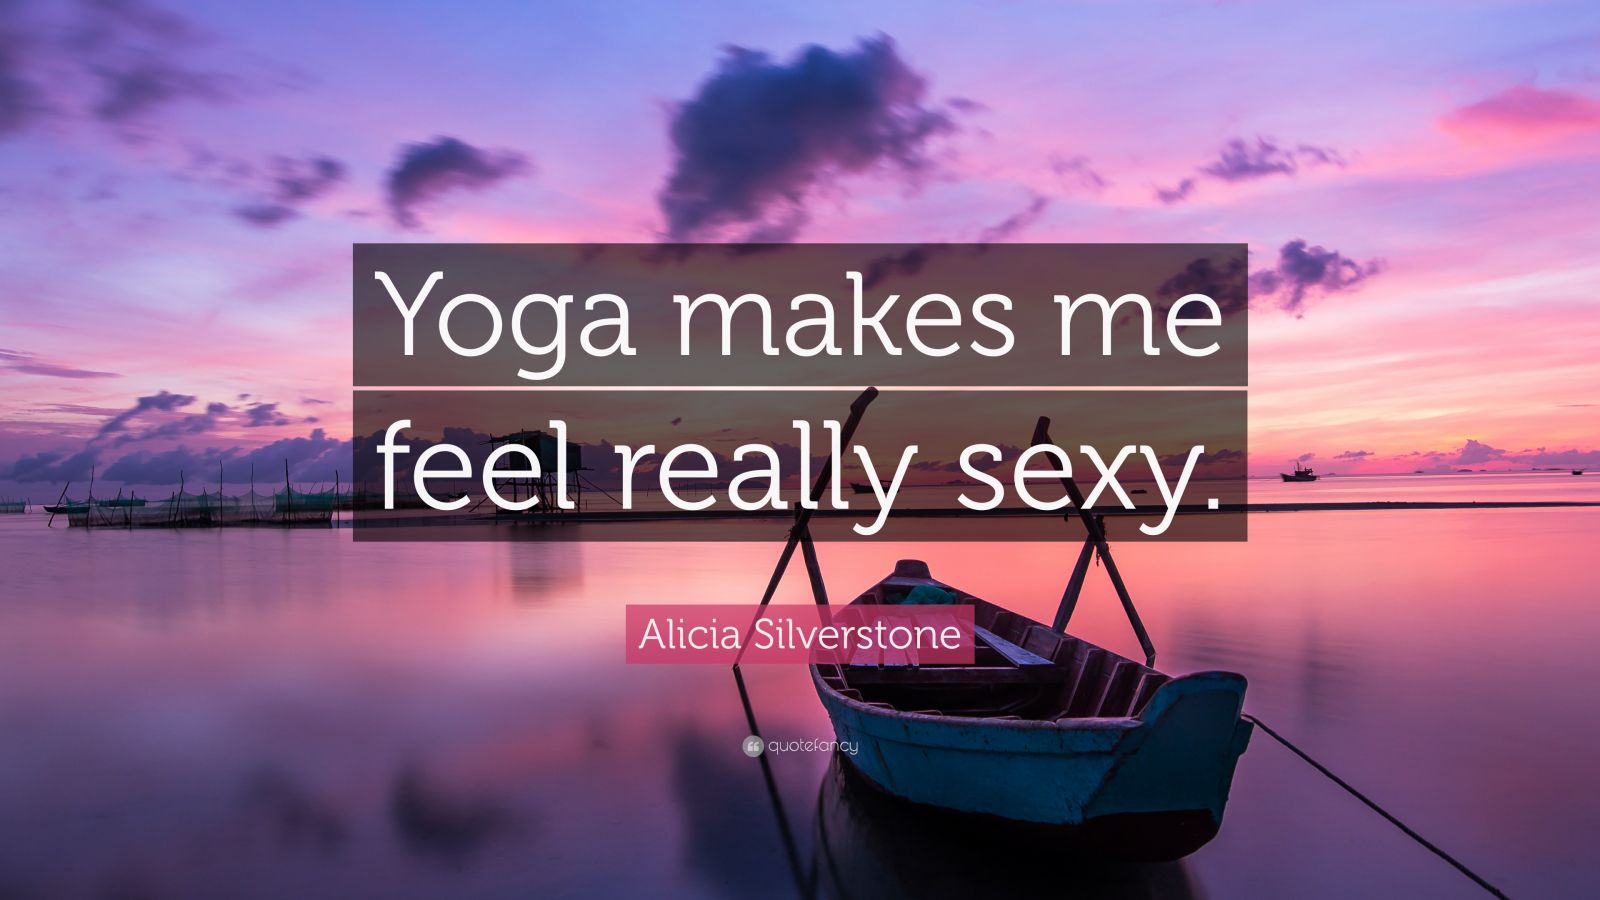 Alicia Silverstone Quote Yoga Makes Me Feel Really Sexy” 12 Wallpapers Quotefancy